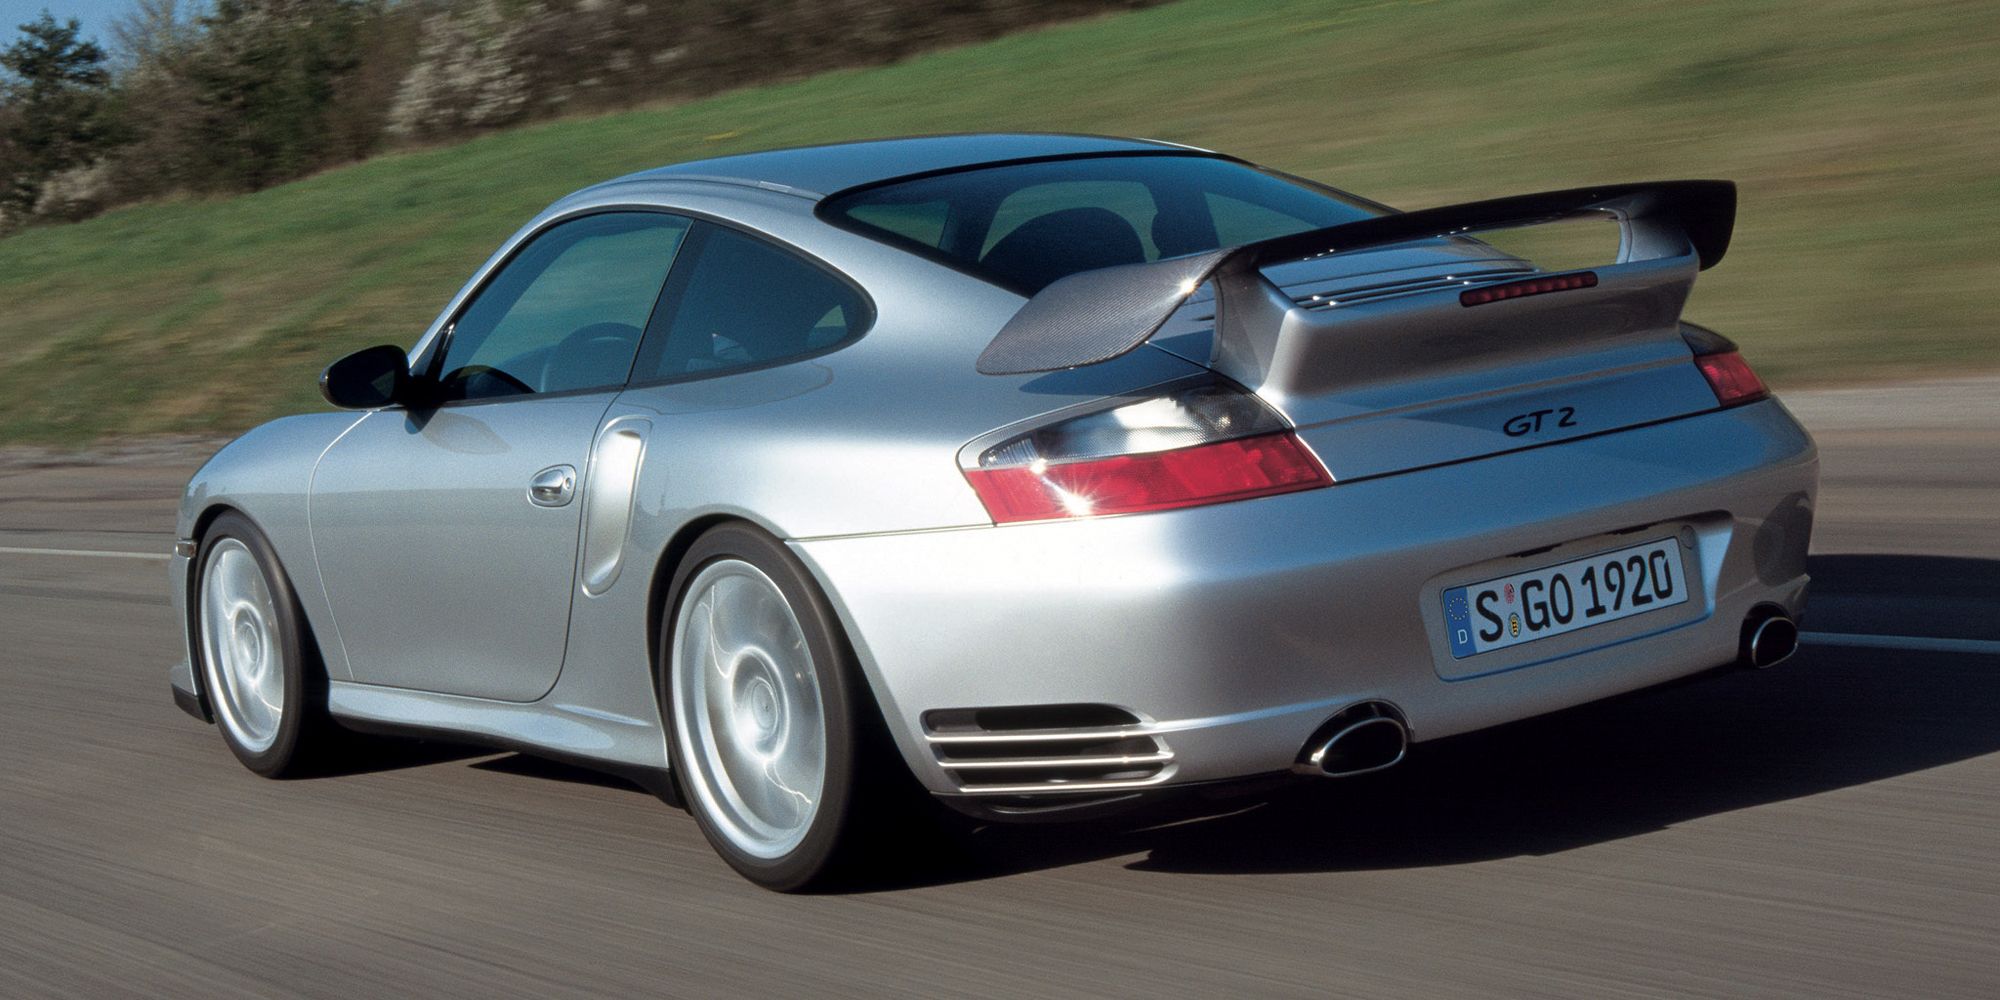 The rear of the 996 GT2